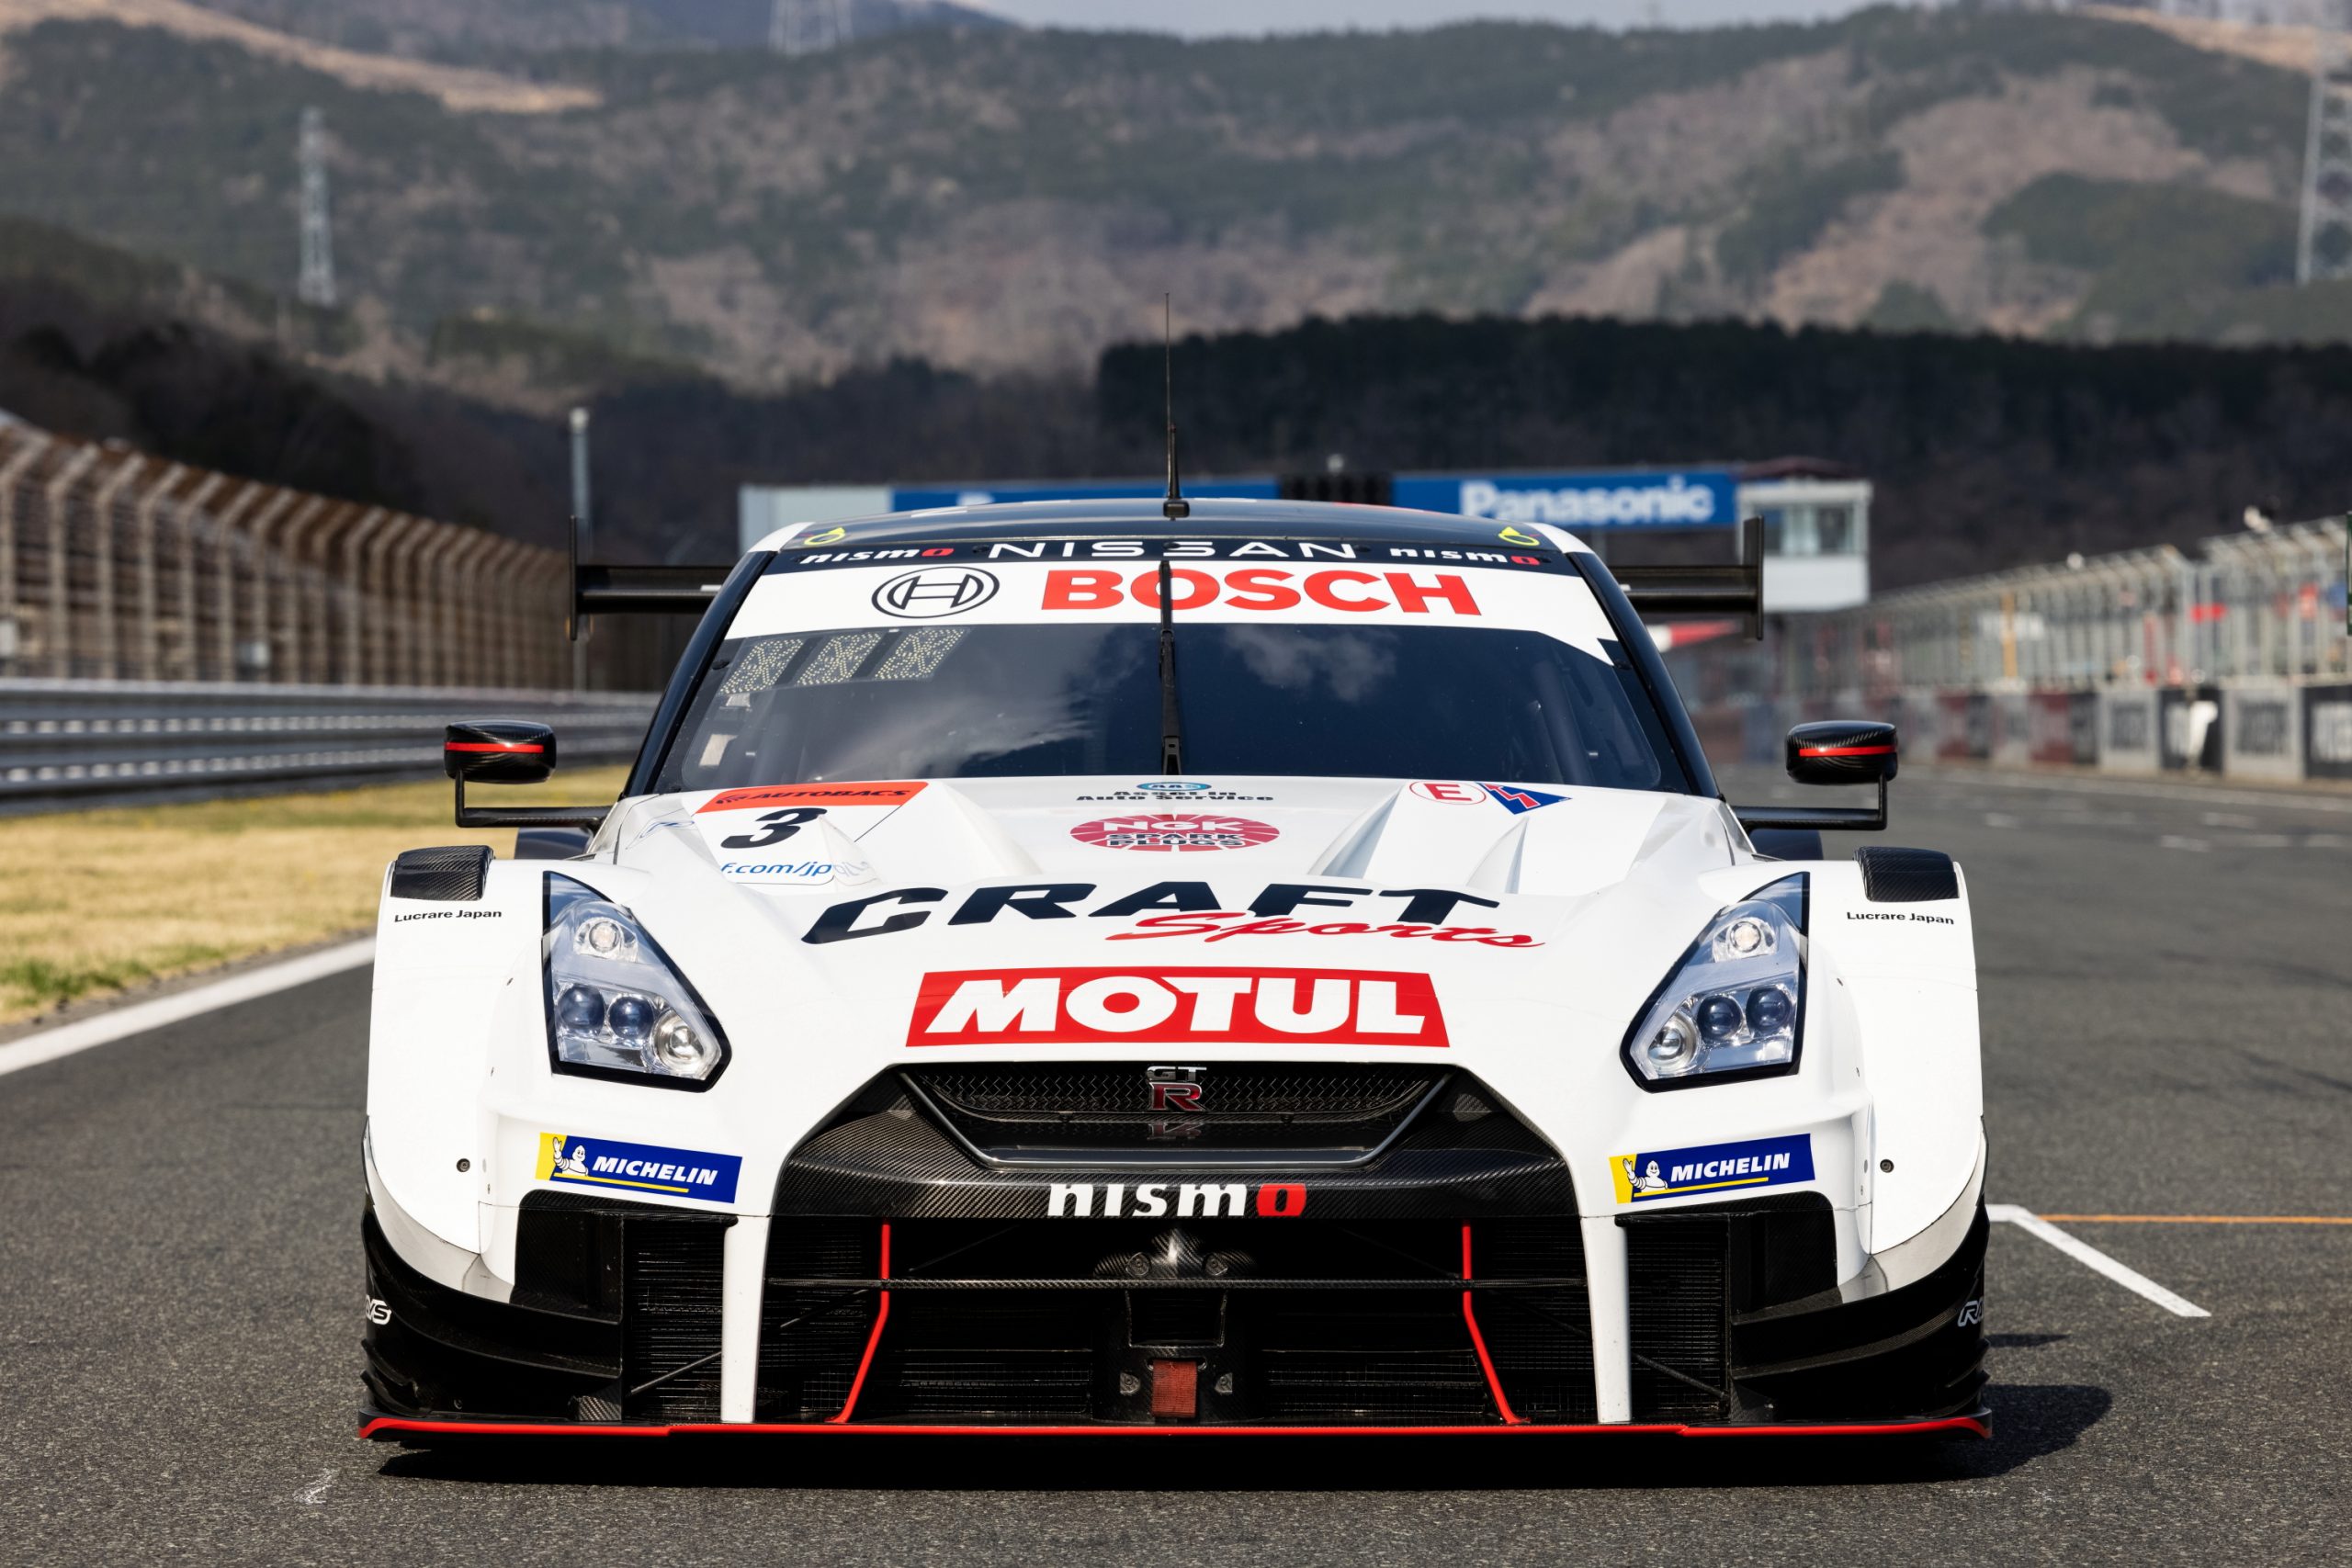 General 2560x1707 Nismo Nissan GT-R NISMO Nissan GT-R race cars race tracks livery Super GT white cars frontal view motorsport car vehicle Nissan